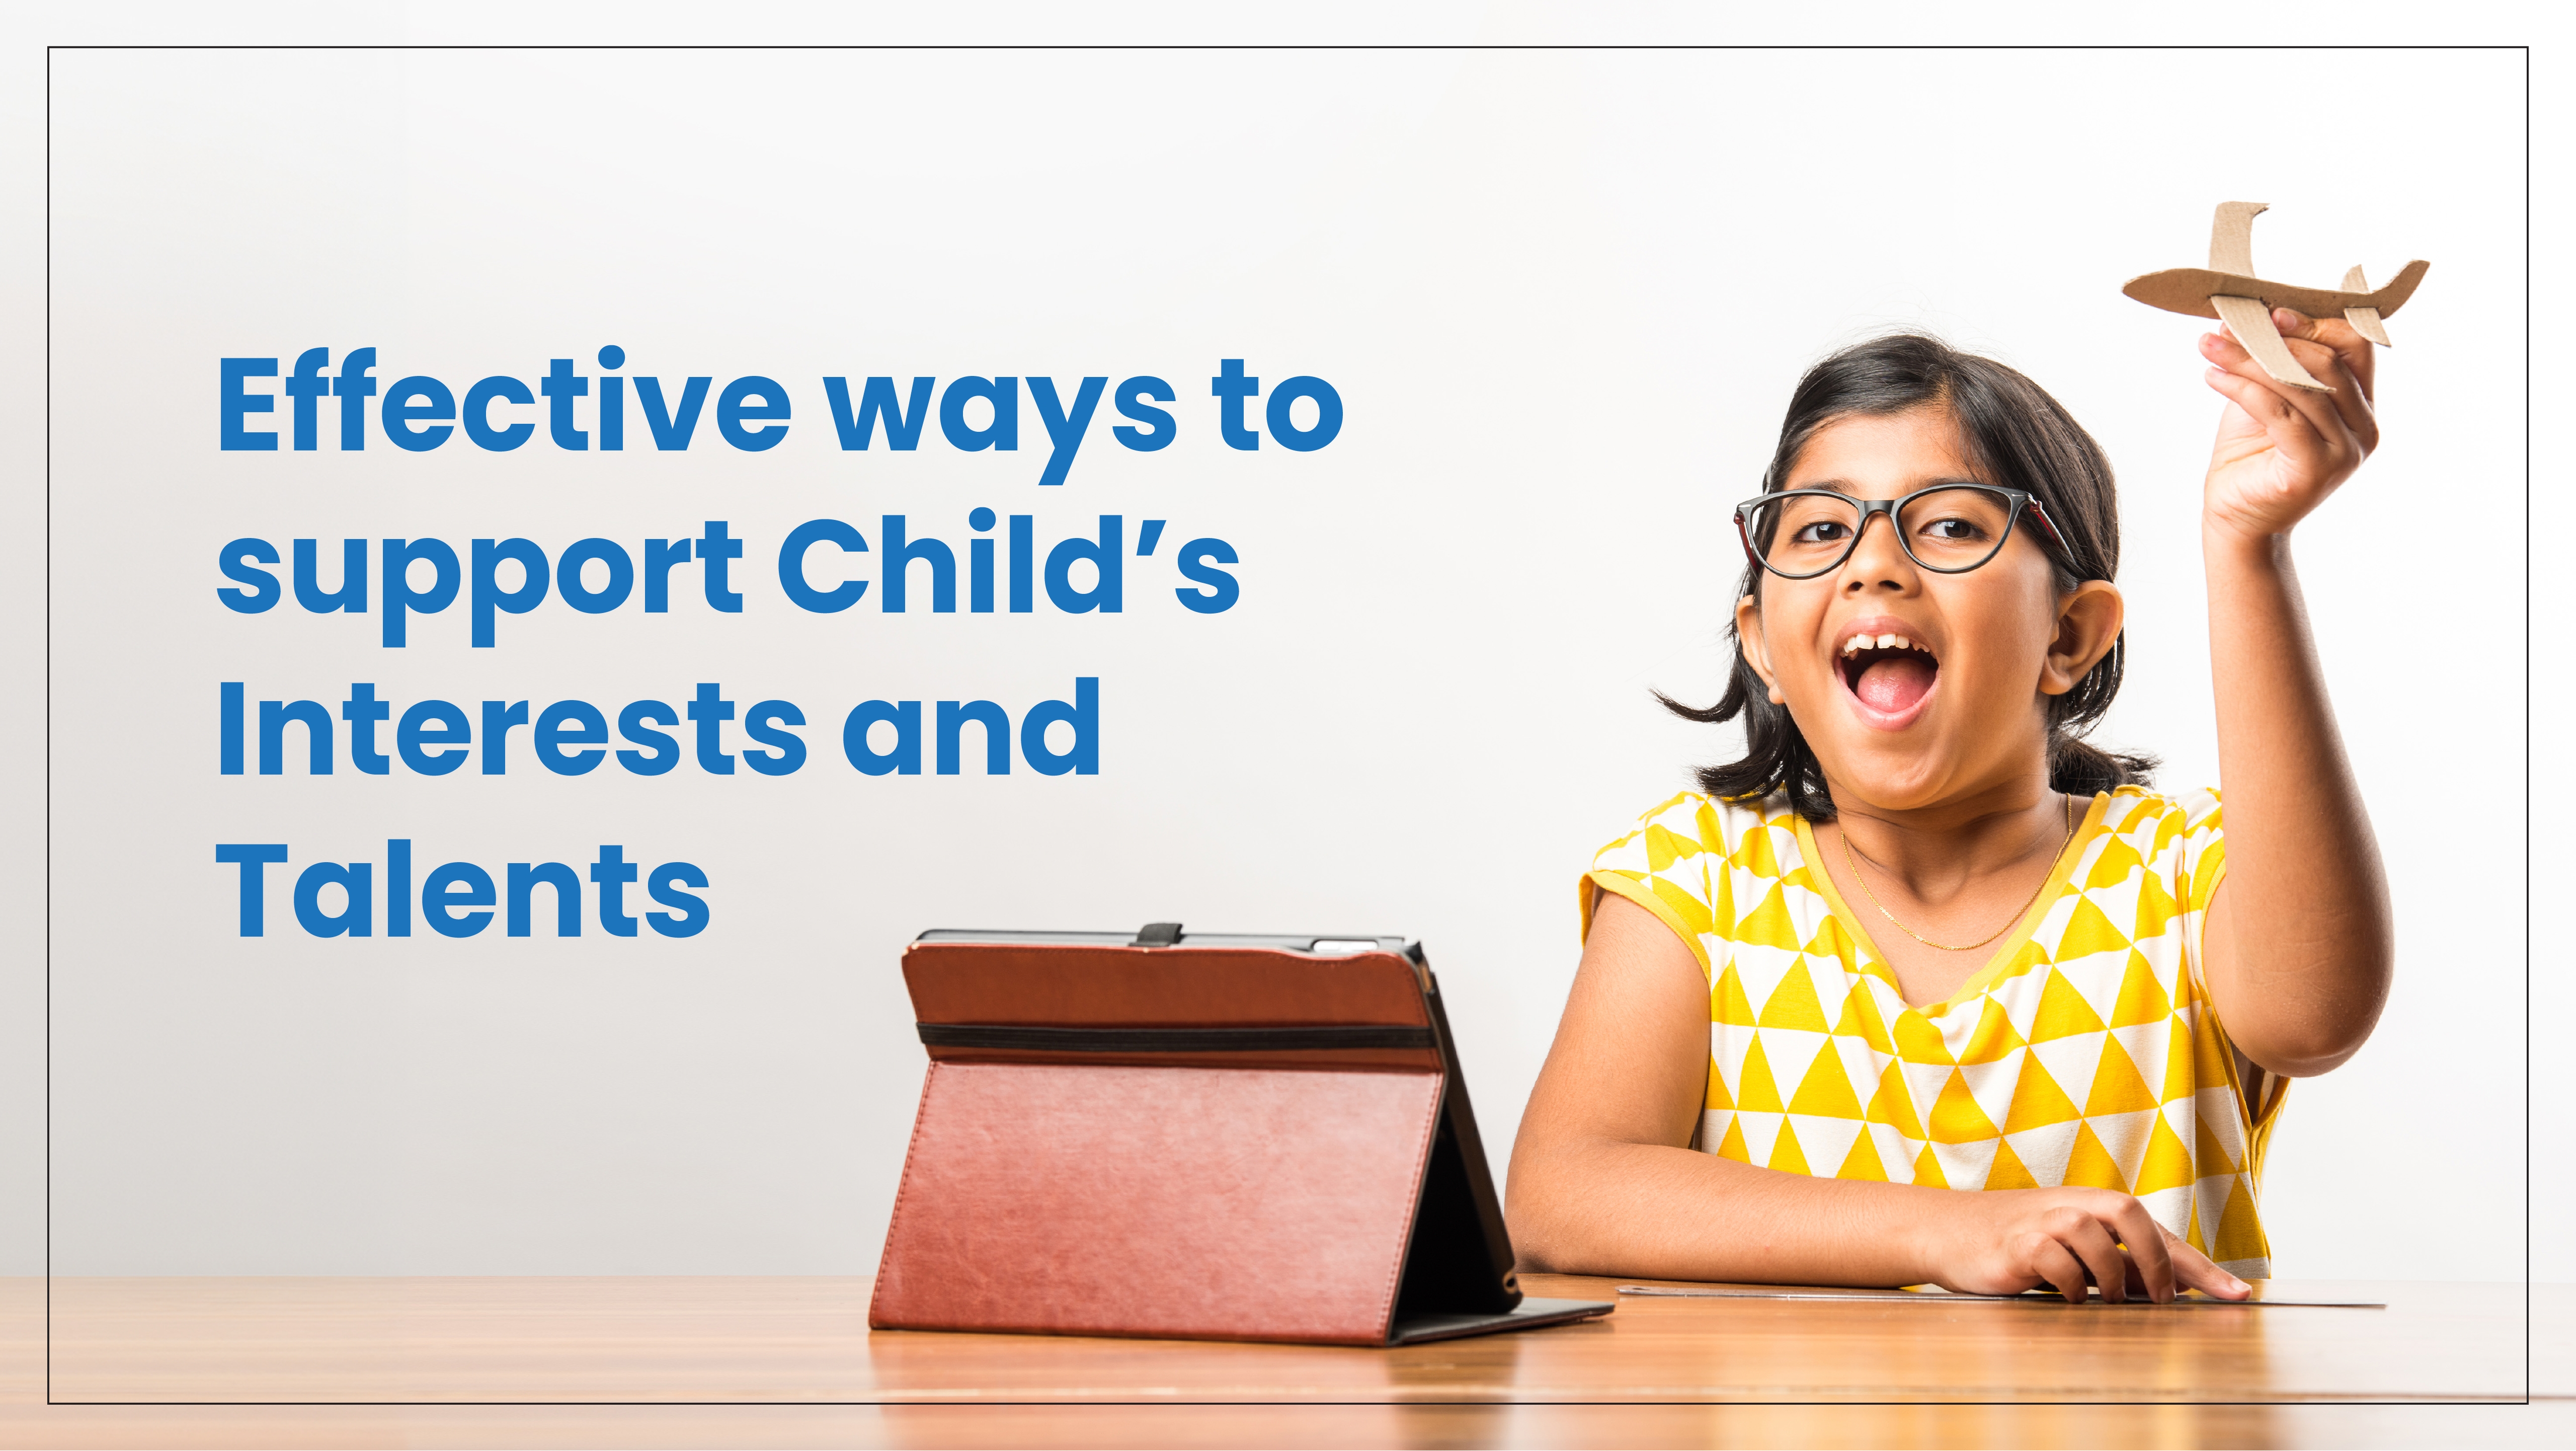 Effective ways to support Child’s Interests and Talents